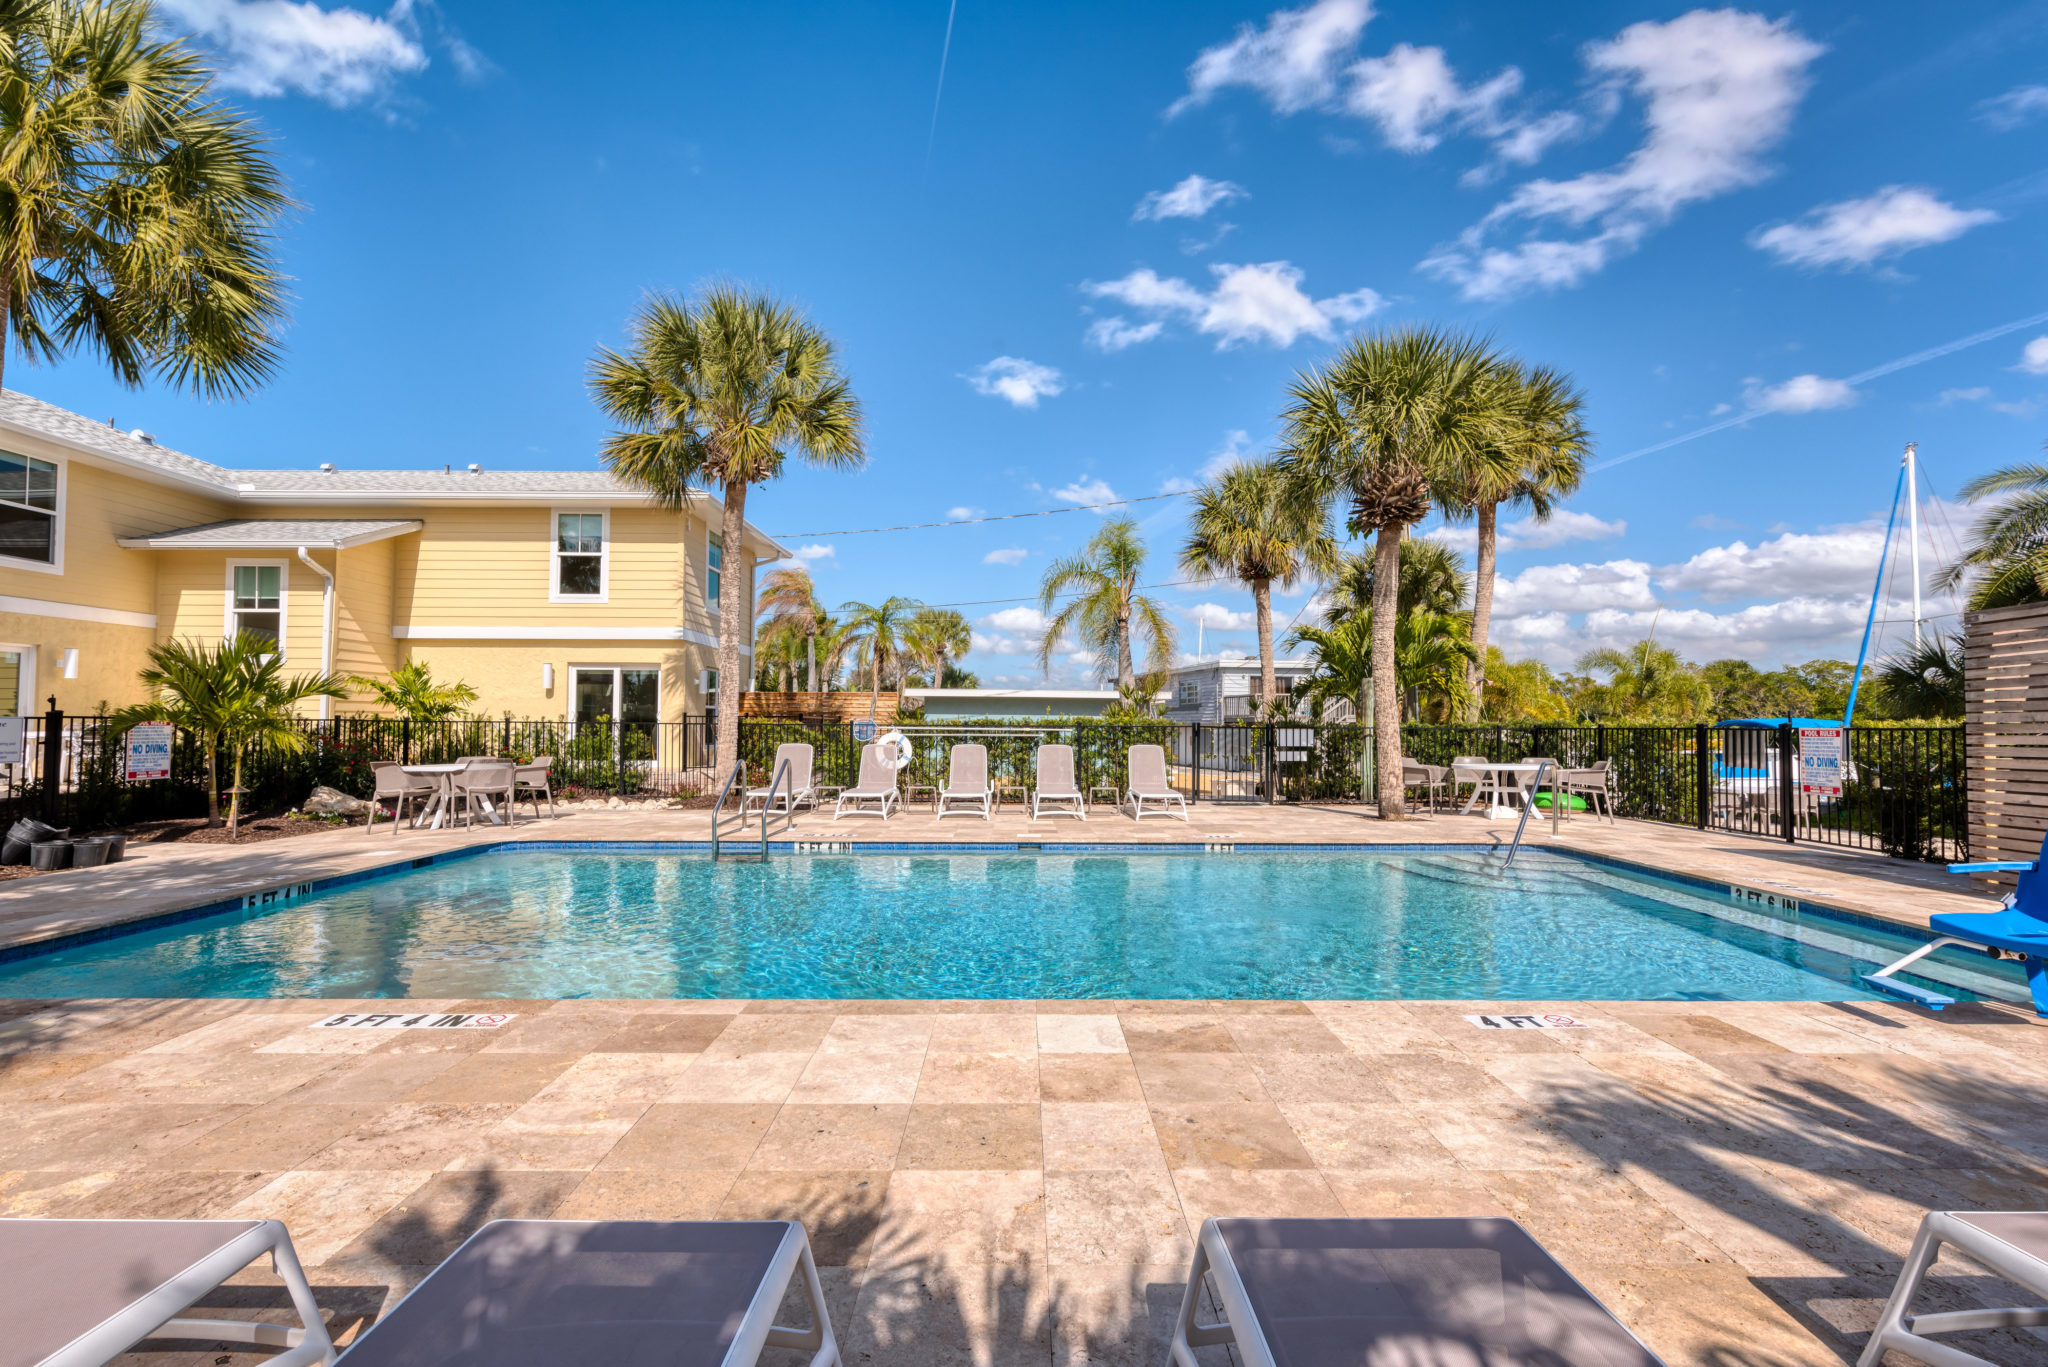 Casey Key resorts with a pool